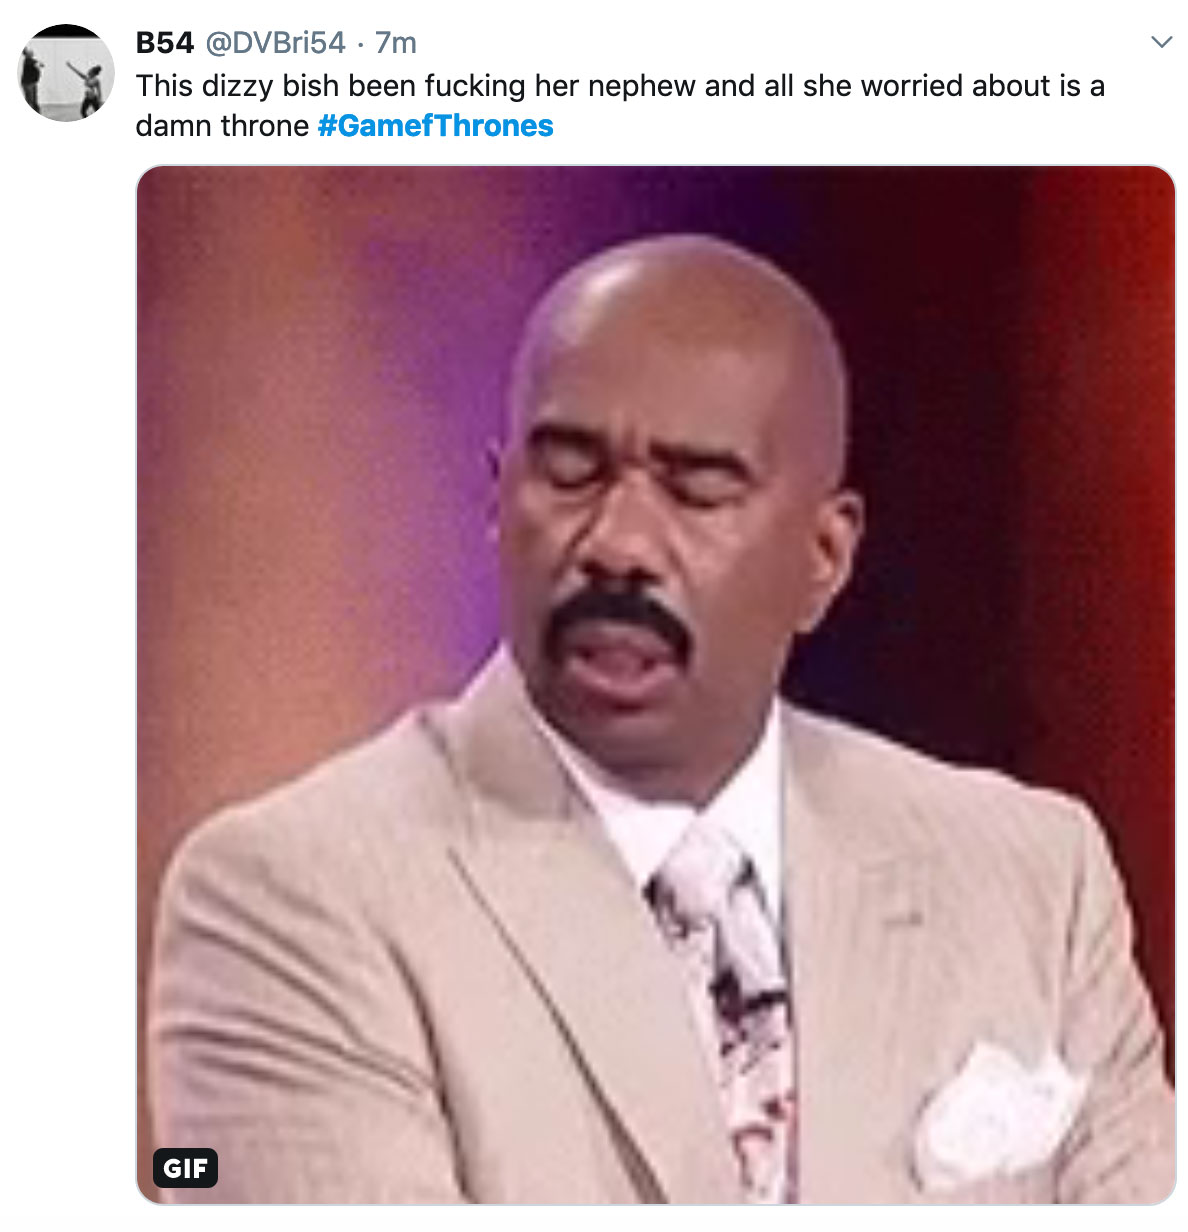 Game of Thrones Season 8 Episode 2 Meme - Steve Harvey looking shocked with the text 'This dizzy bish been fucking her nephew and all she worried about is a damn throne'